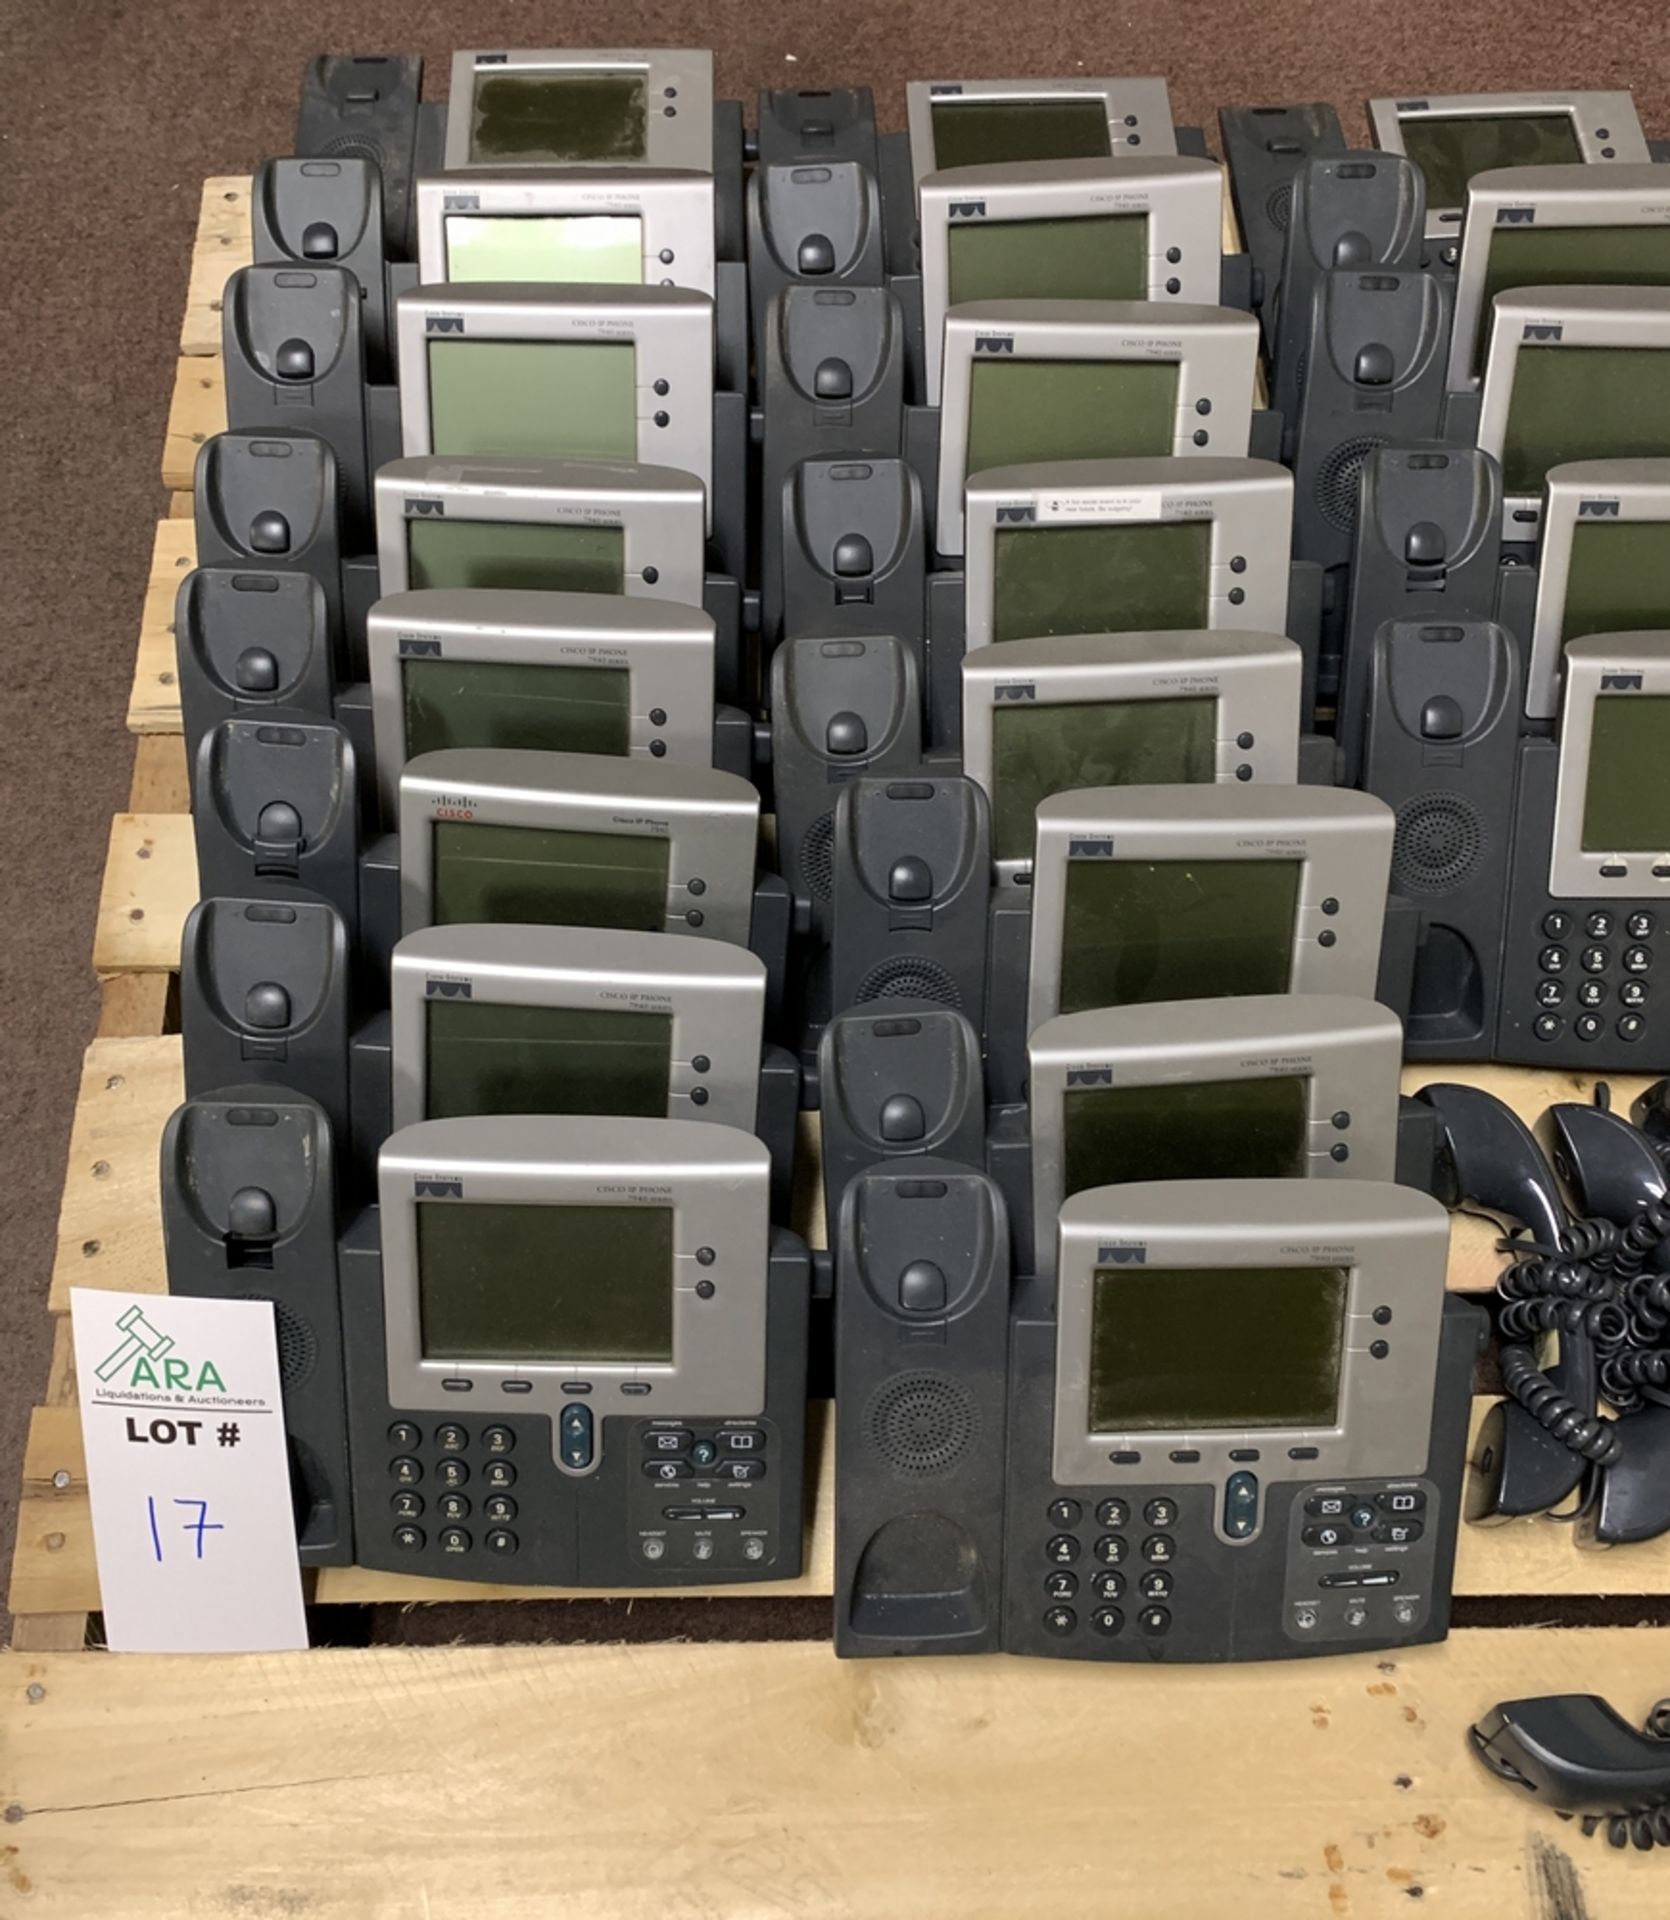 21 CISCO PHONE SYSTEMS - MODEL 7940 - INCLUDING HANDSETS ALL ITEMS ARE SOLD AS IS UNTESTED BUT - Image 3 of 4